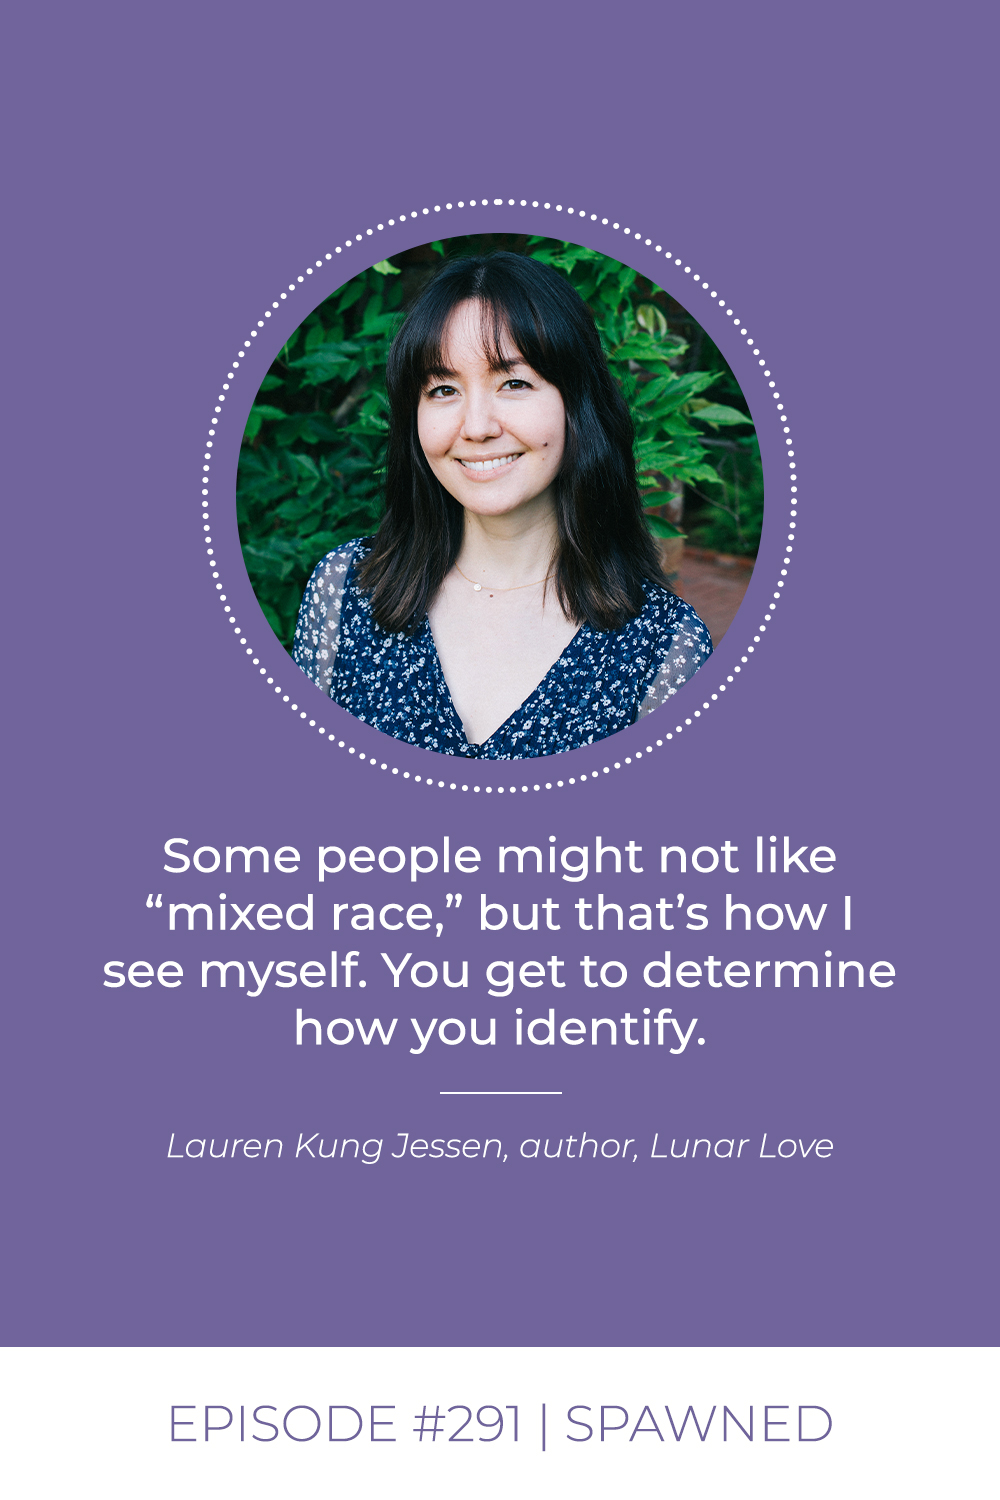 Lauren Kung Jessen on being mixed race in America | Check out Lunar Love, her debut novel